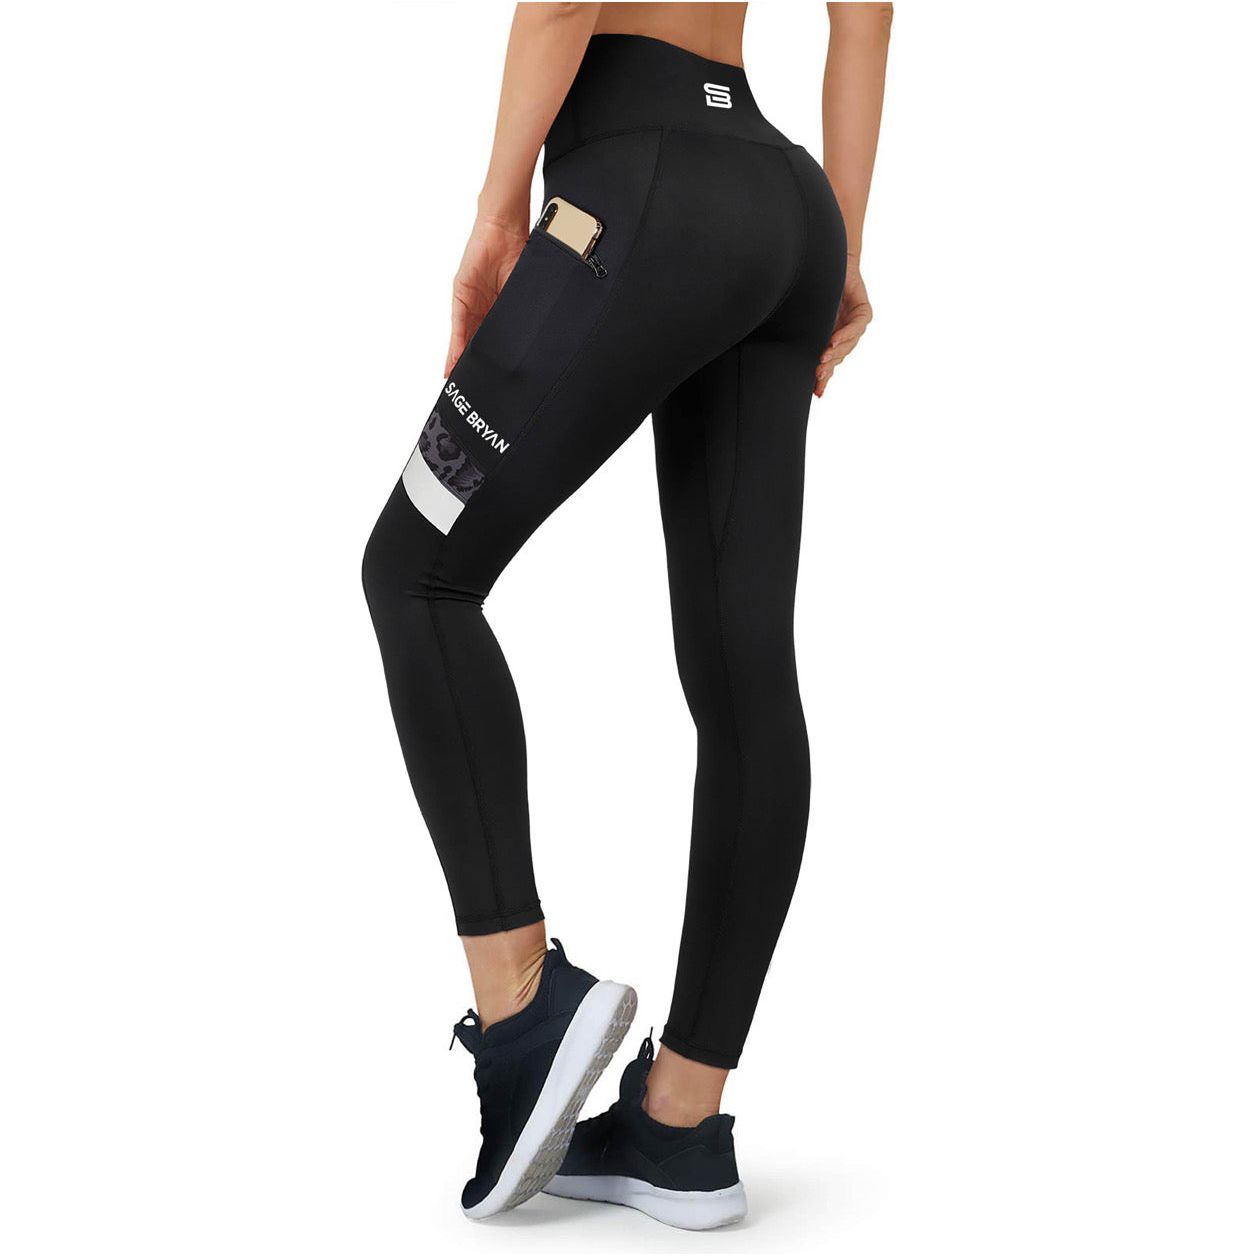 Tmustobe Cropped Yoga Pants Are Comfy and Stylish | Us Weekly